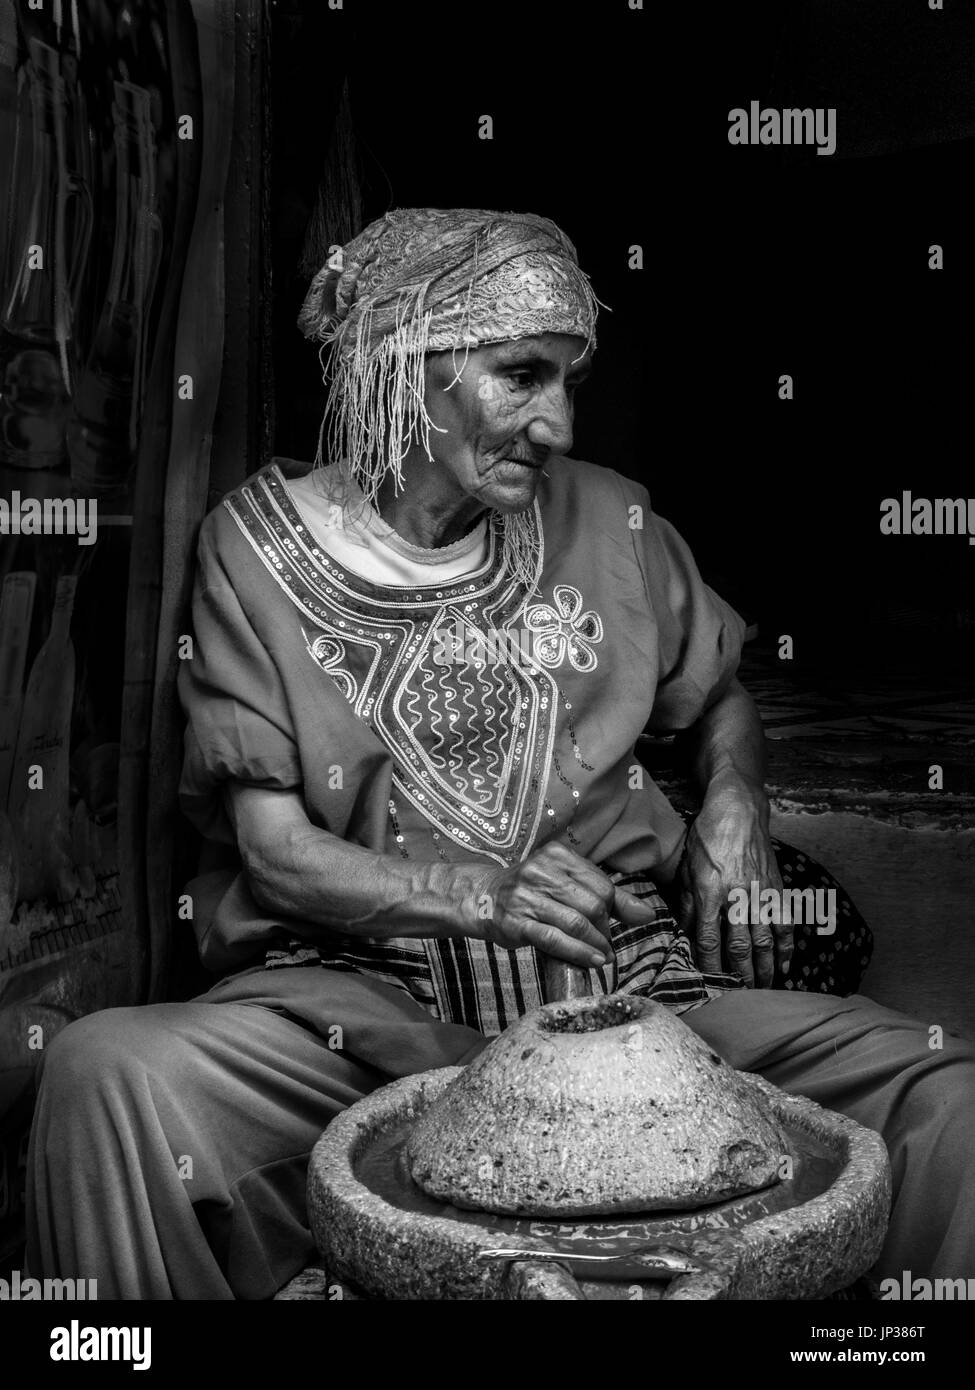 Elderly Moroccan lady making 'Amlou' in Essaouira. Amlou is a Moroccan recipe from the region of Agadir. It is a small marvel of simplicity and taste. Stock Photo